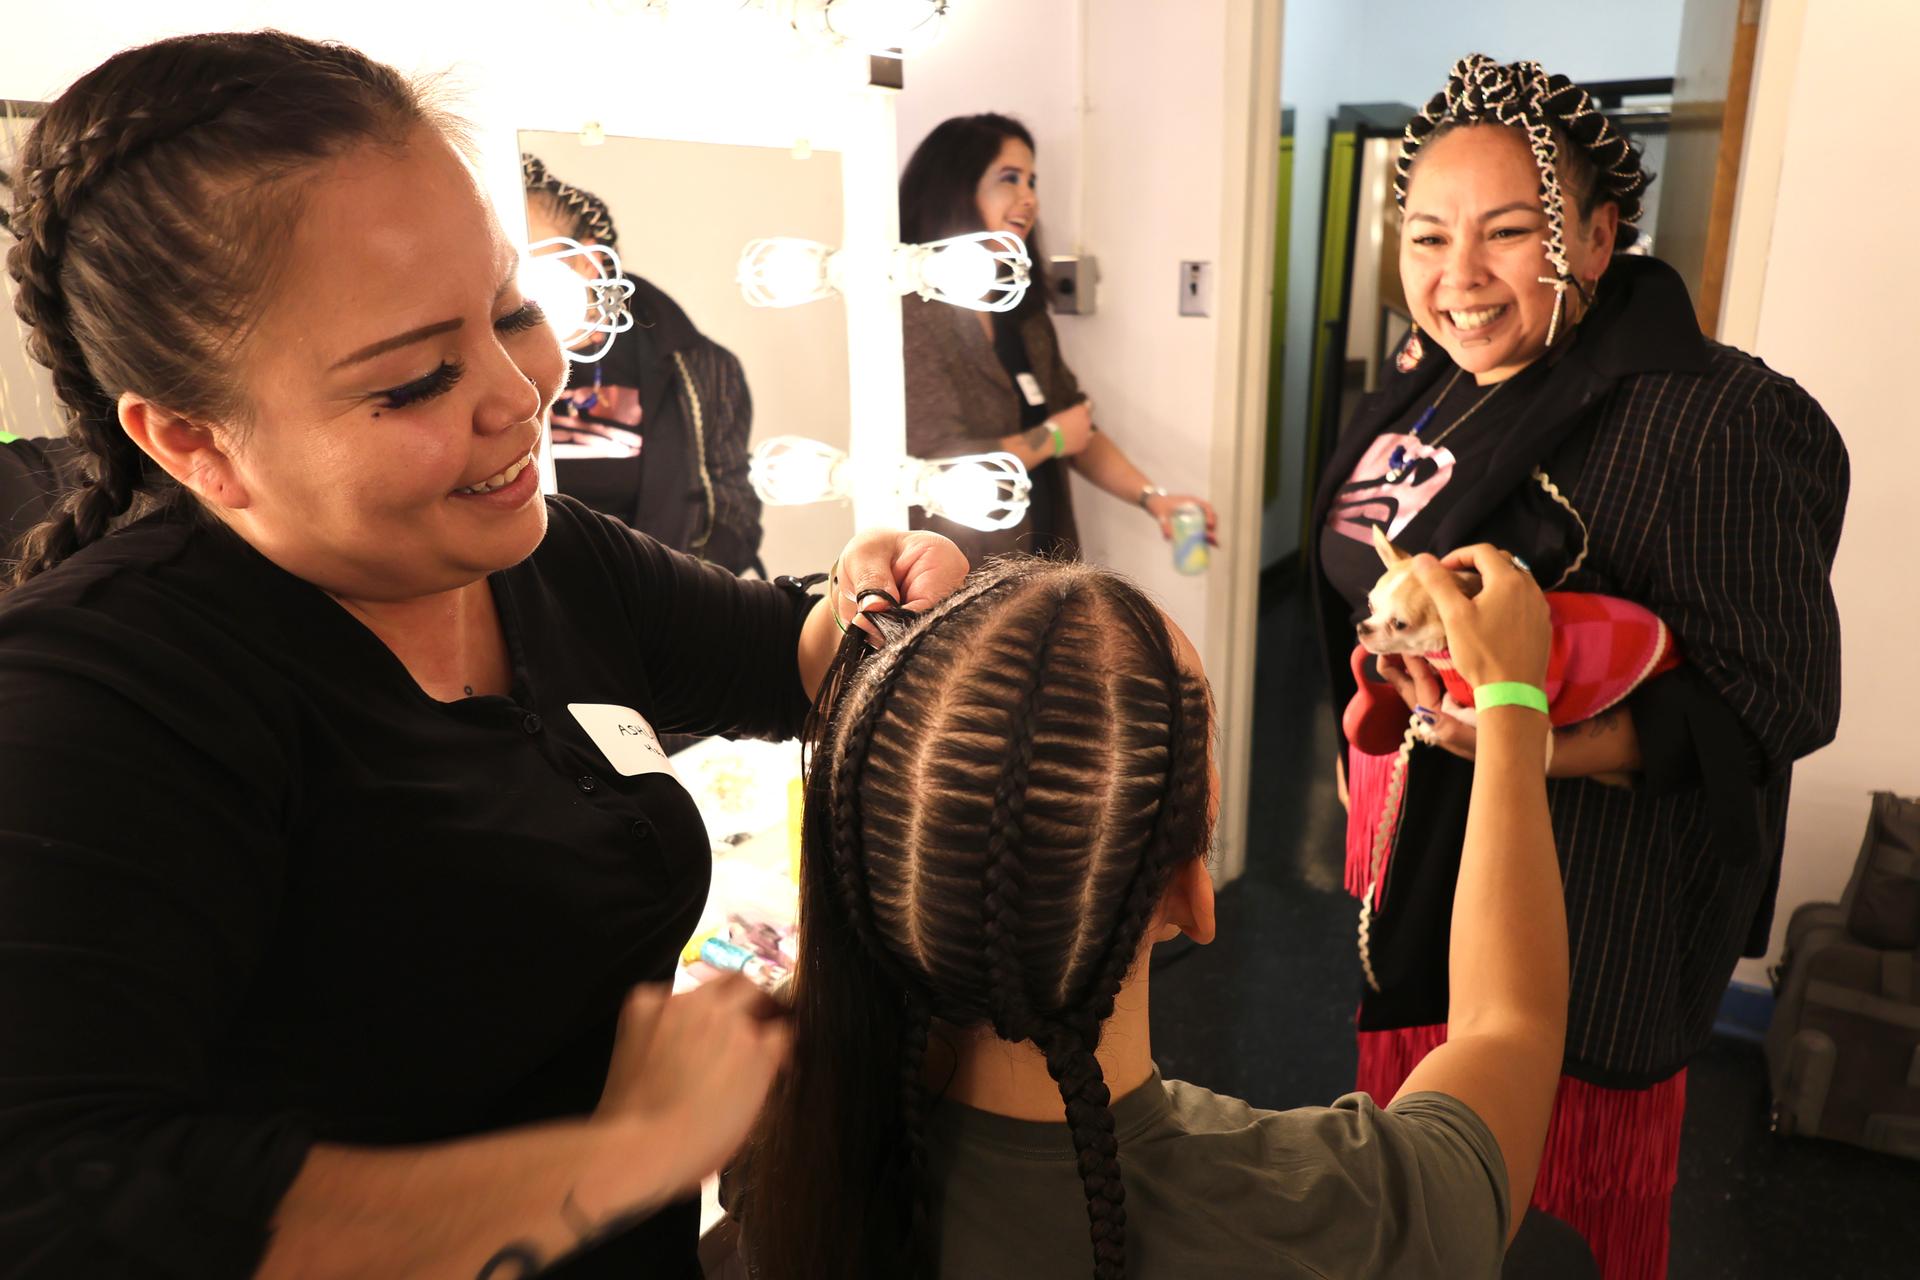 Hair stylist Ashley Jack (left) braids hair on model Ricky-Lee Watts (center) before Indigenous Futures streetwear fashion night. Lauraleigh Paul (right) smiles as she holds her dog.